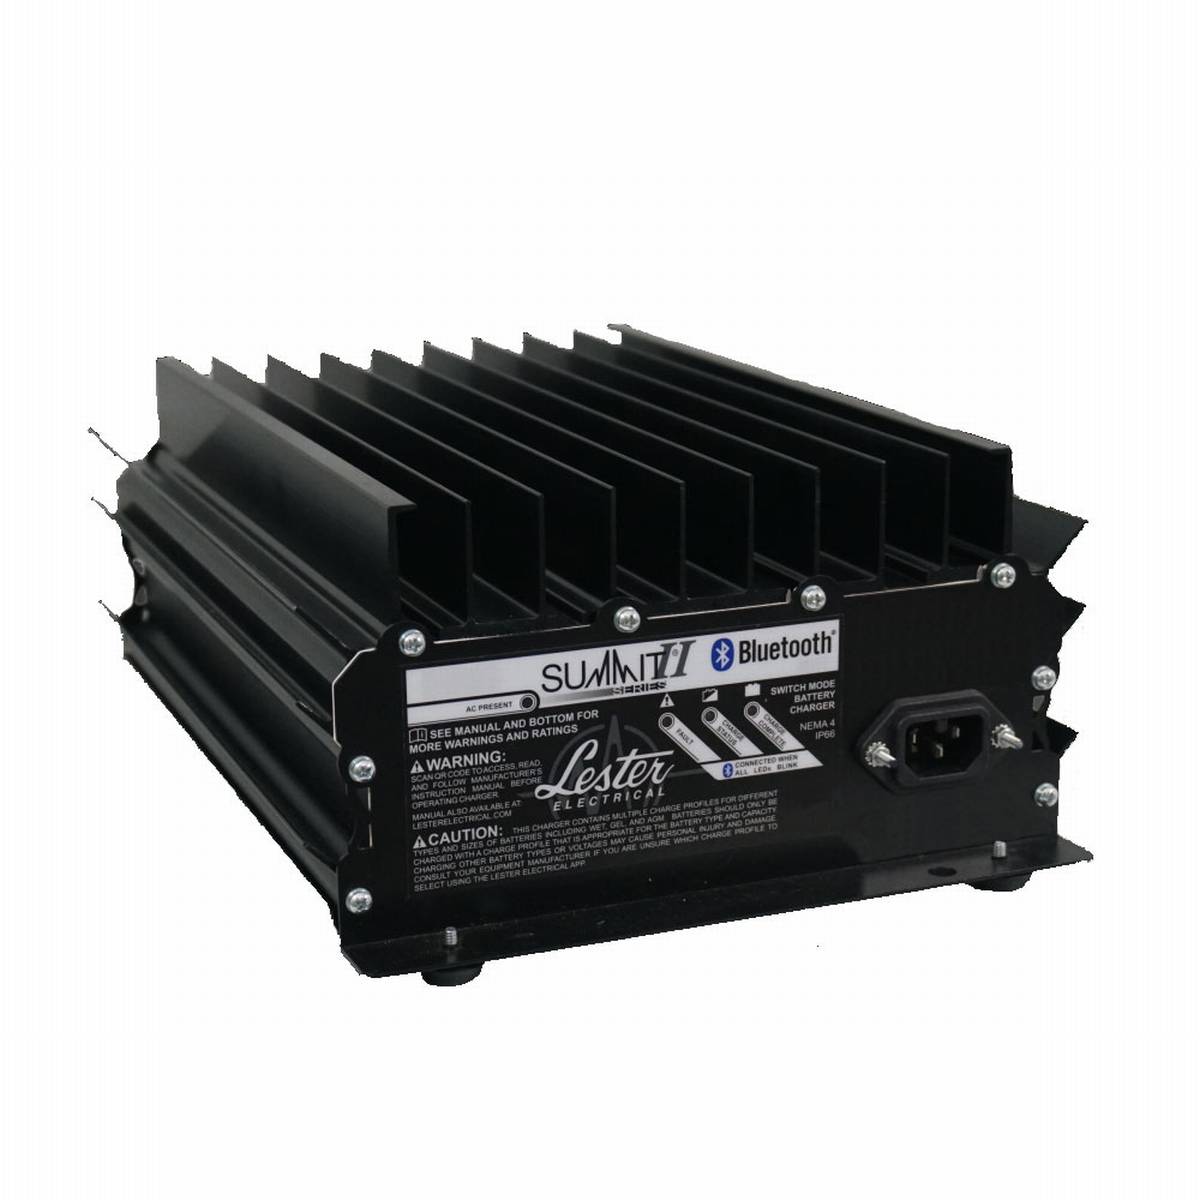 Lester Electrical Summit Series II Industrial Charger 1425W per 24V/36V 40A con Bluetooth